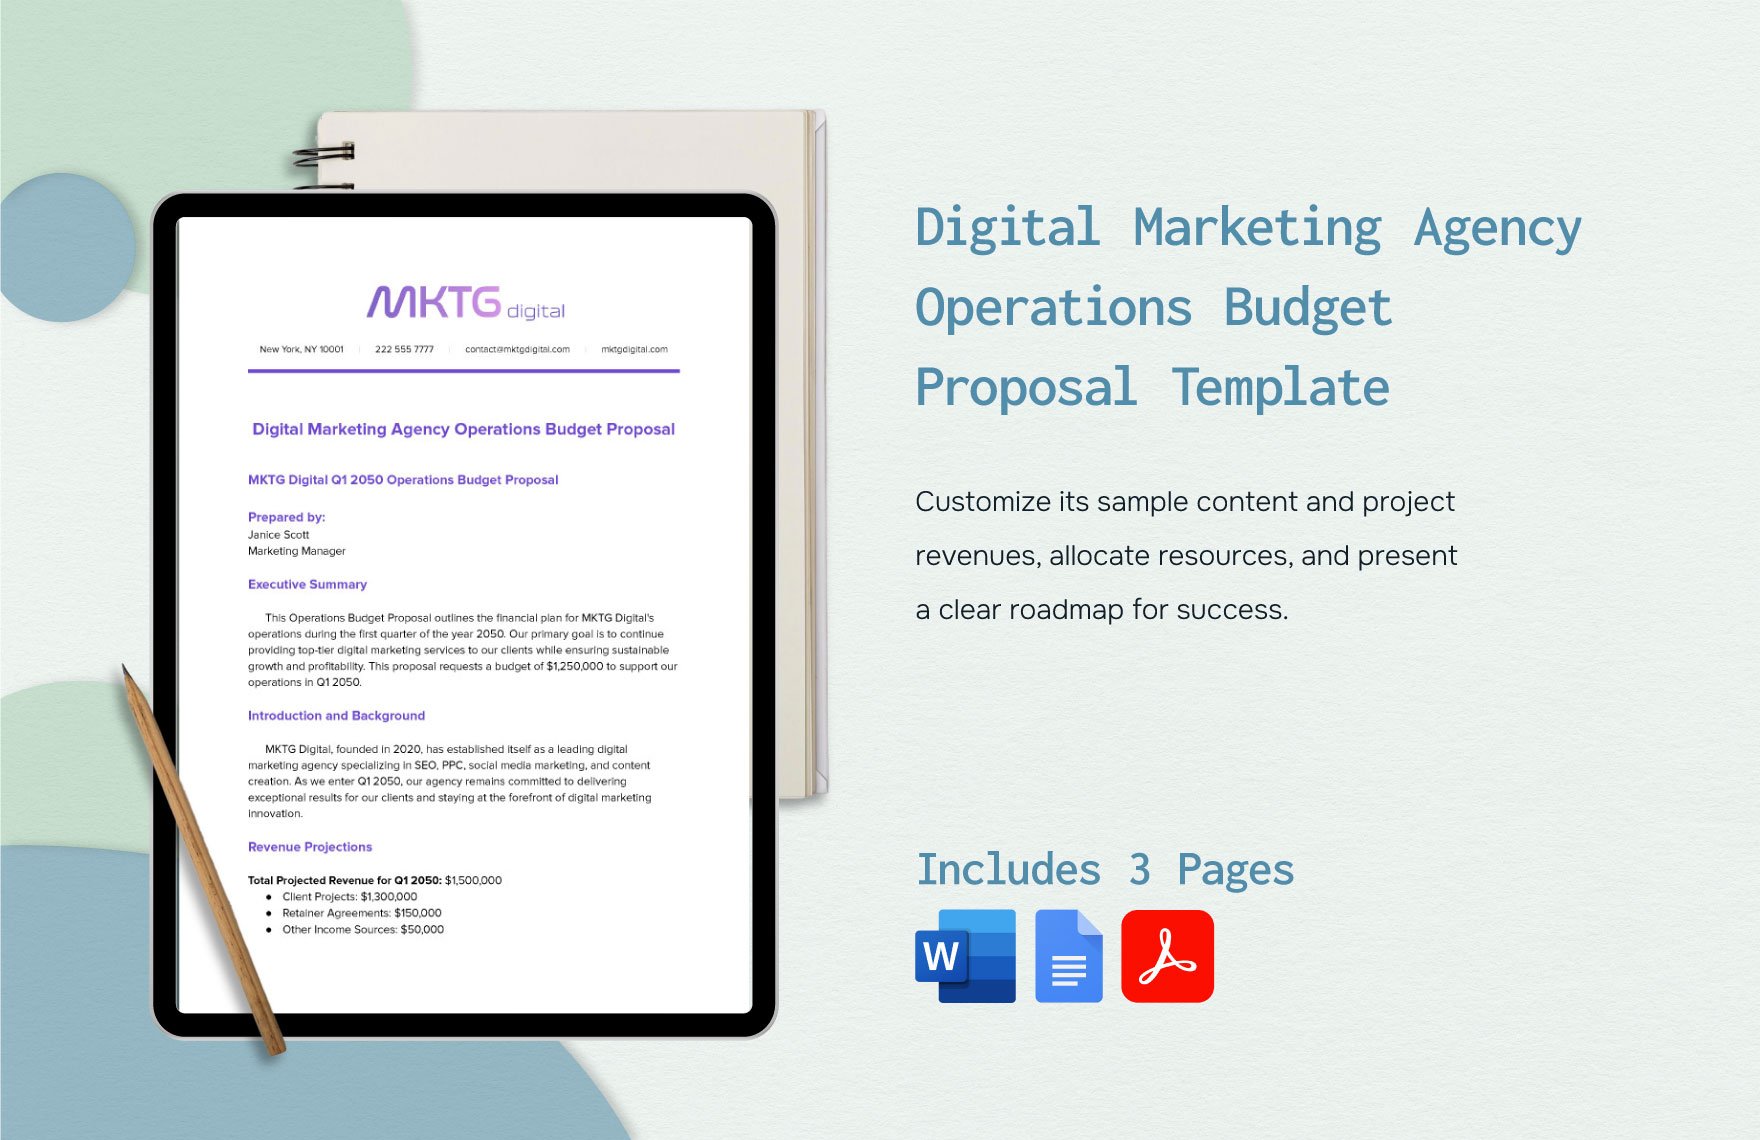 Digital Marketing Agency Operations Budget Proposal Template